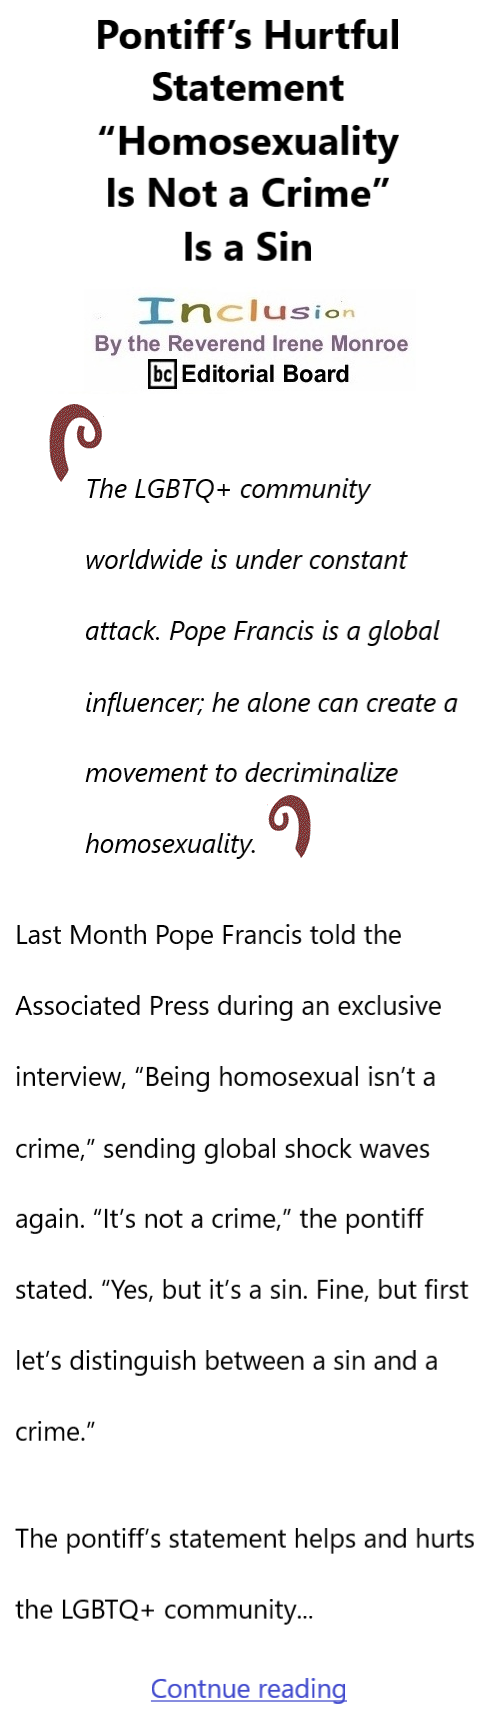 BlackCommentator.com Feb 9, 2023 - Issue 942: Pontiff’s Hurtful Statement “Homosexuality Is Not a Crime” Is a Sin - Inclusion By The Reverend Irene Monroe, BC Editorial Board